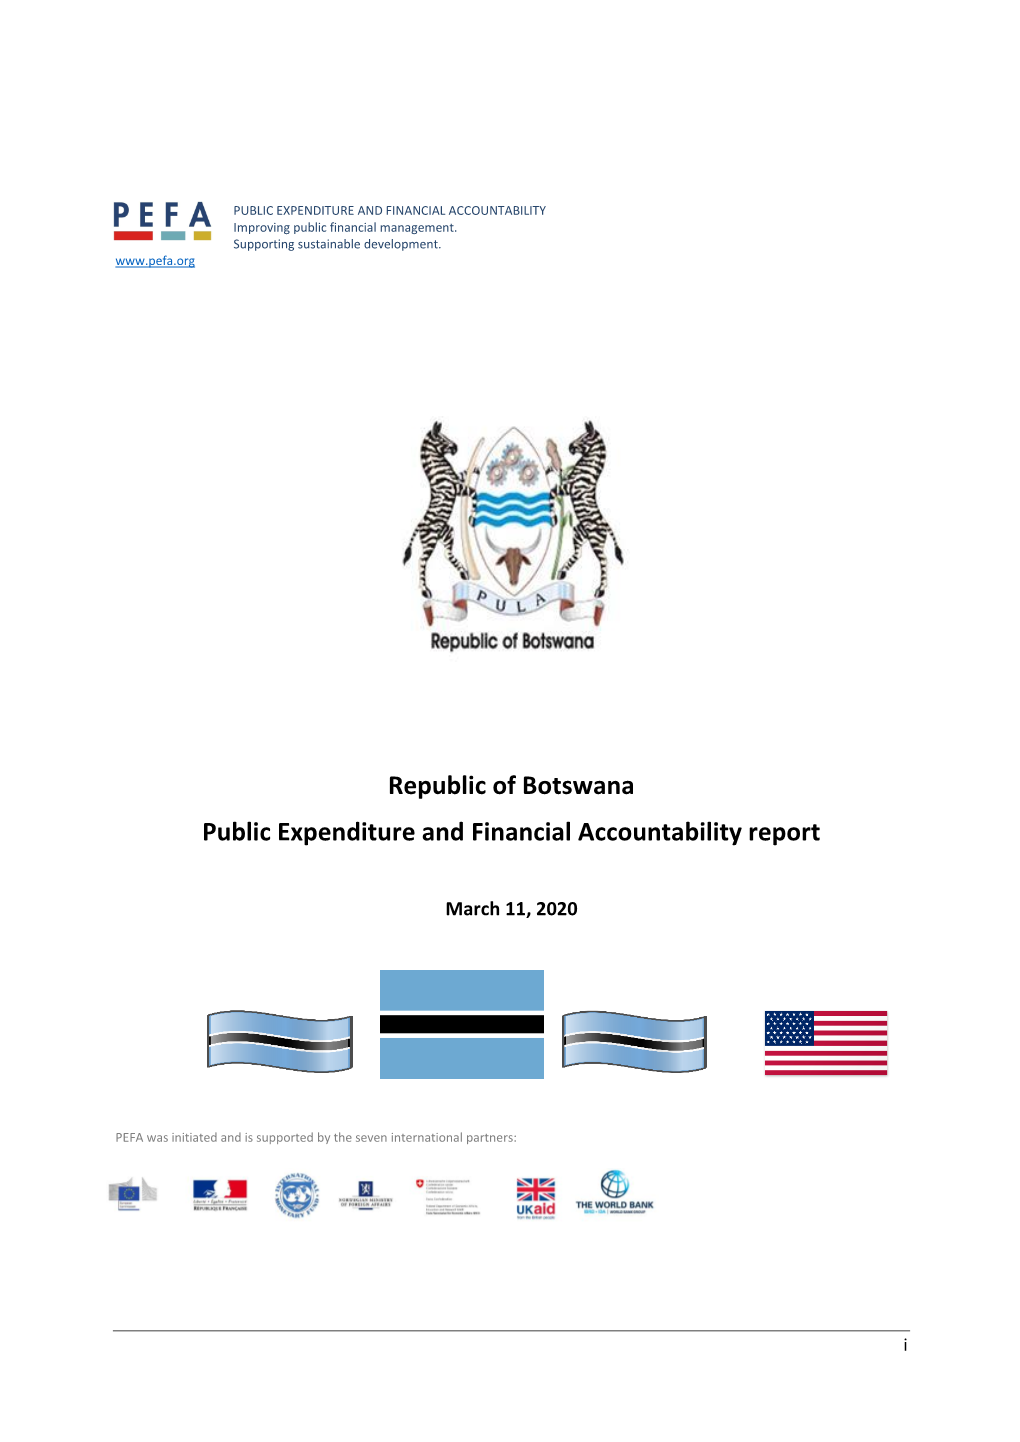 Republic of Botswana Public Expenditure and Financial Accountability Report